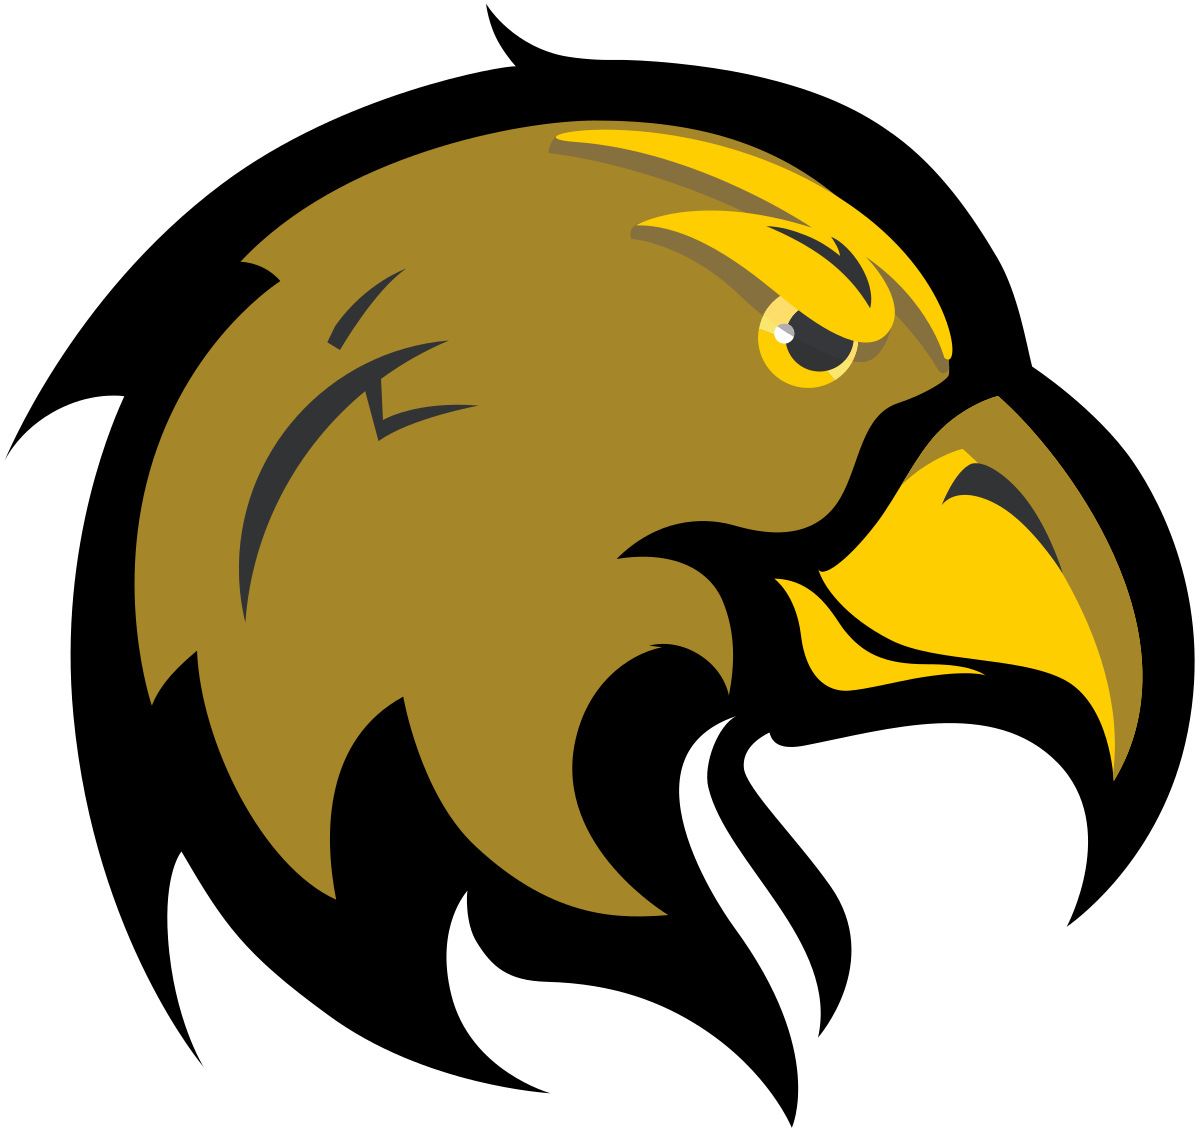 CSULA Logo - Cal State Los Angeles Golden Eagles